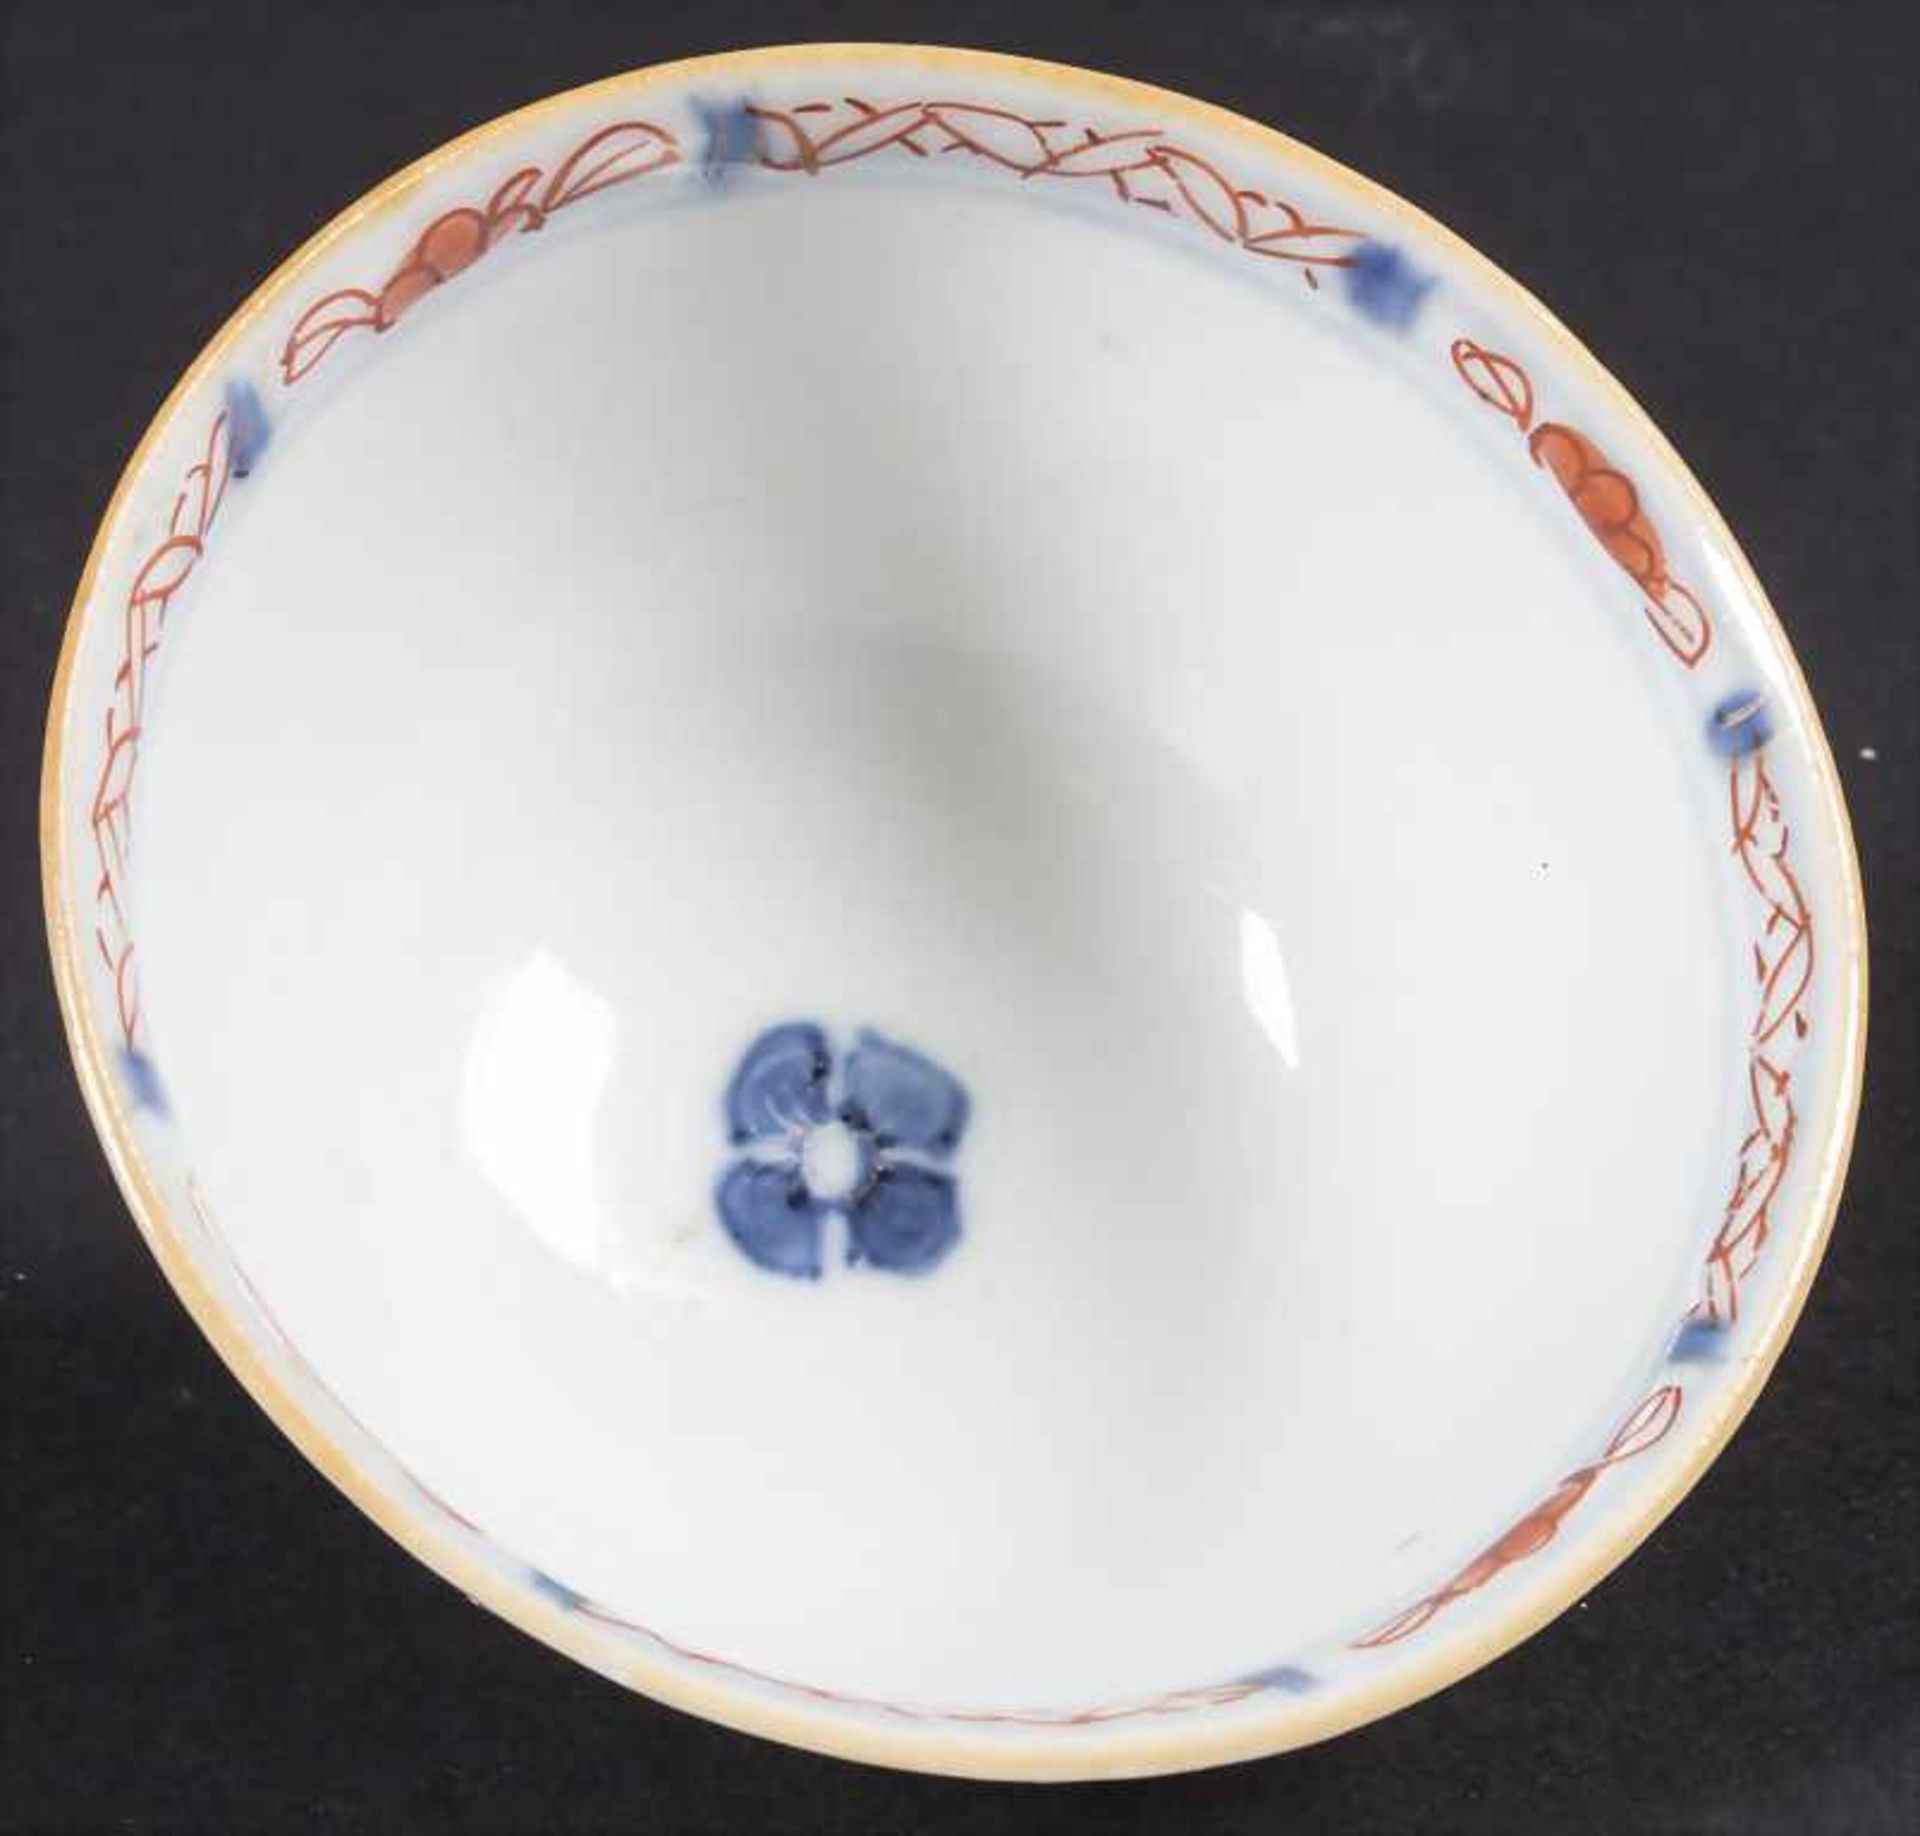 Kumme mit Unterteller / A porcelain bowl with saucer, China, Qing-Dynastie (1644-1911), wohl 18. - Image 4 of 6